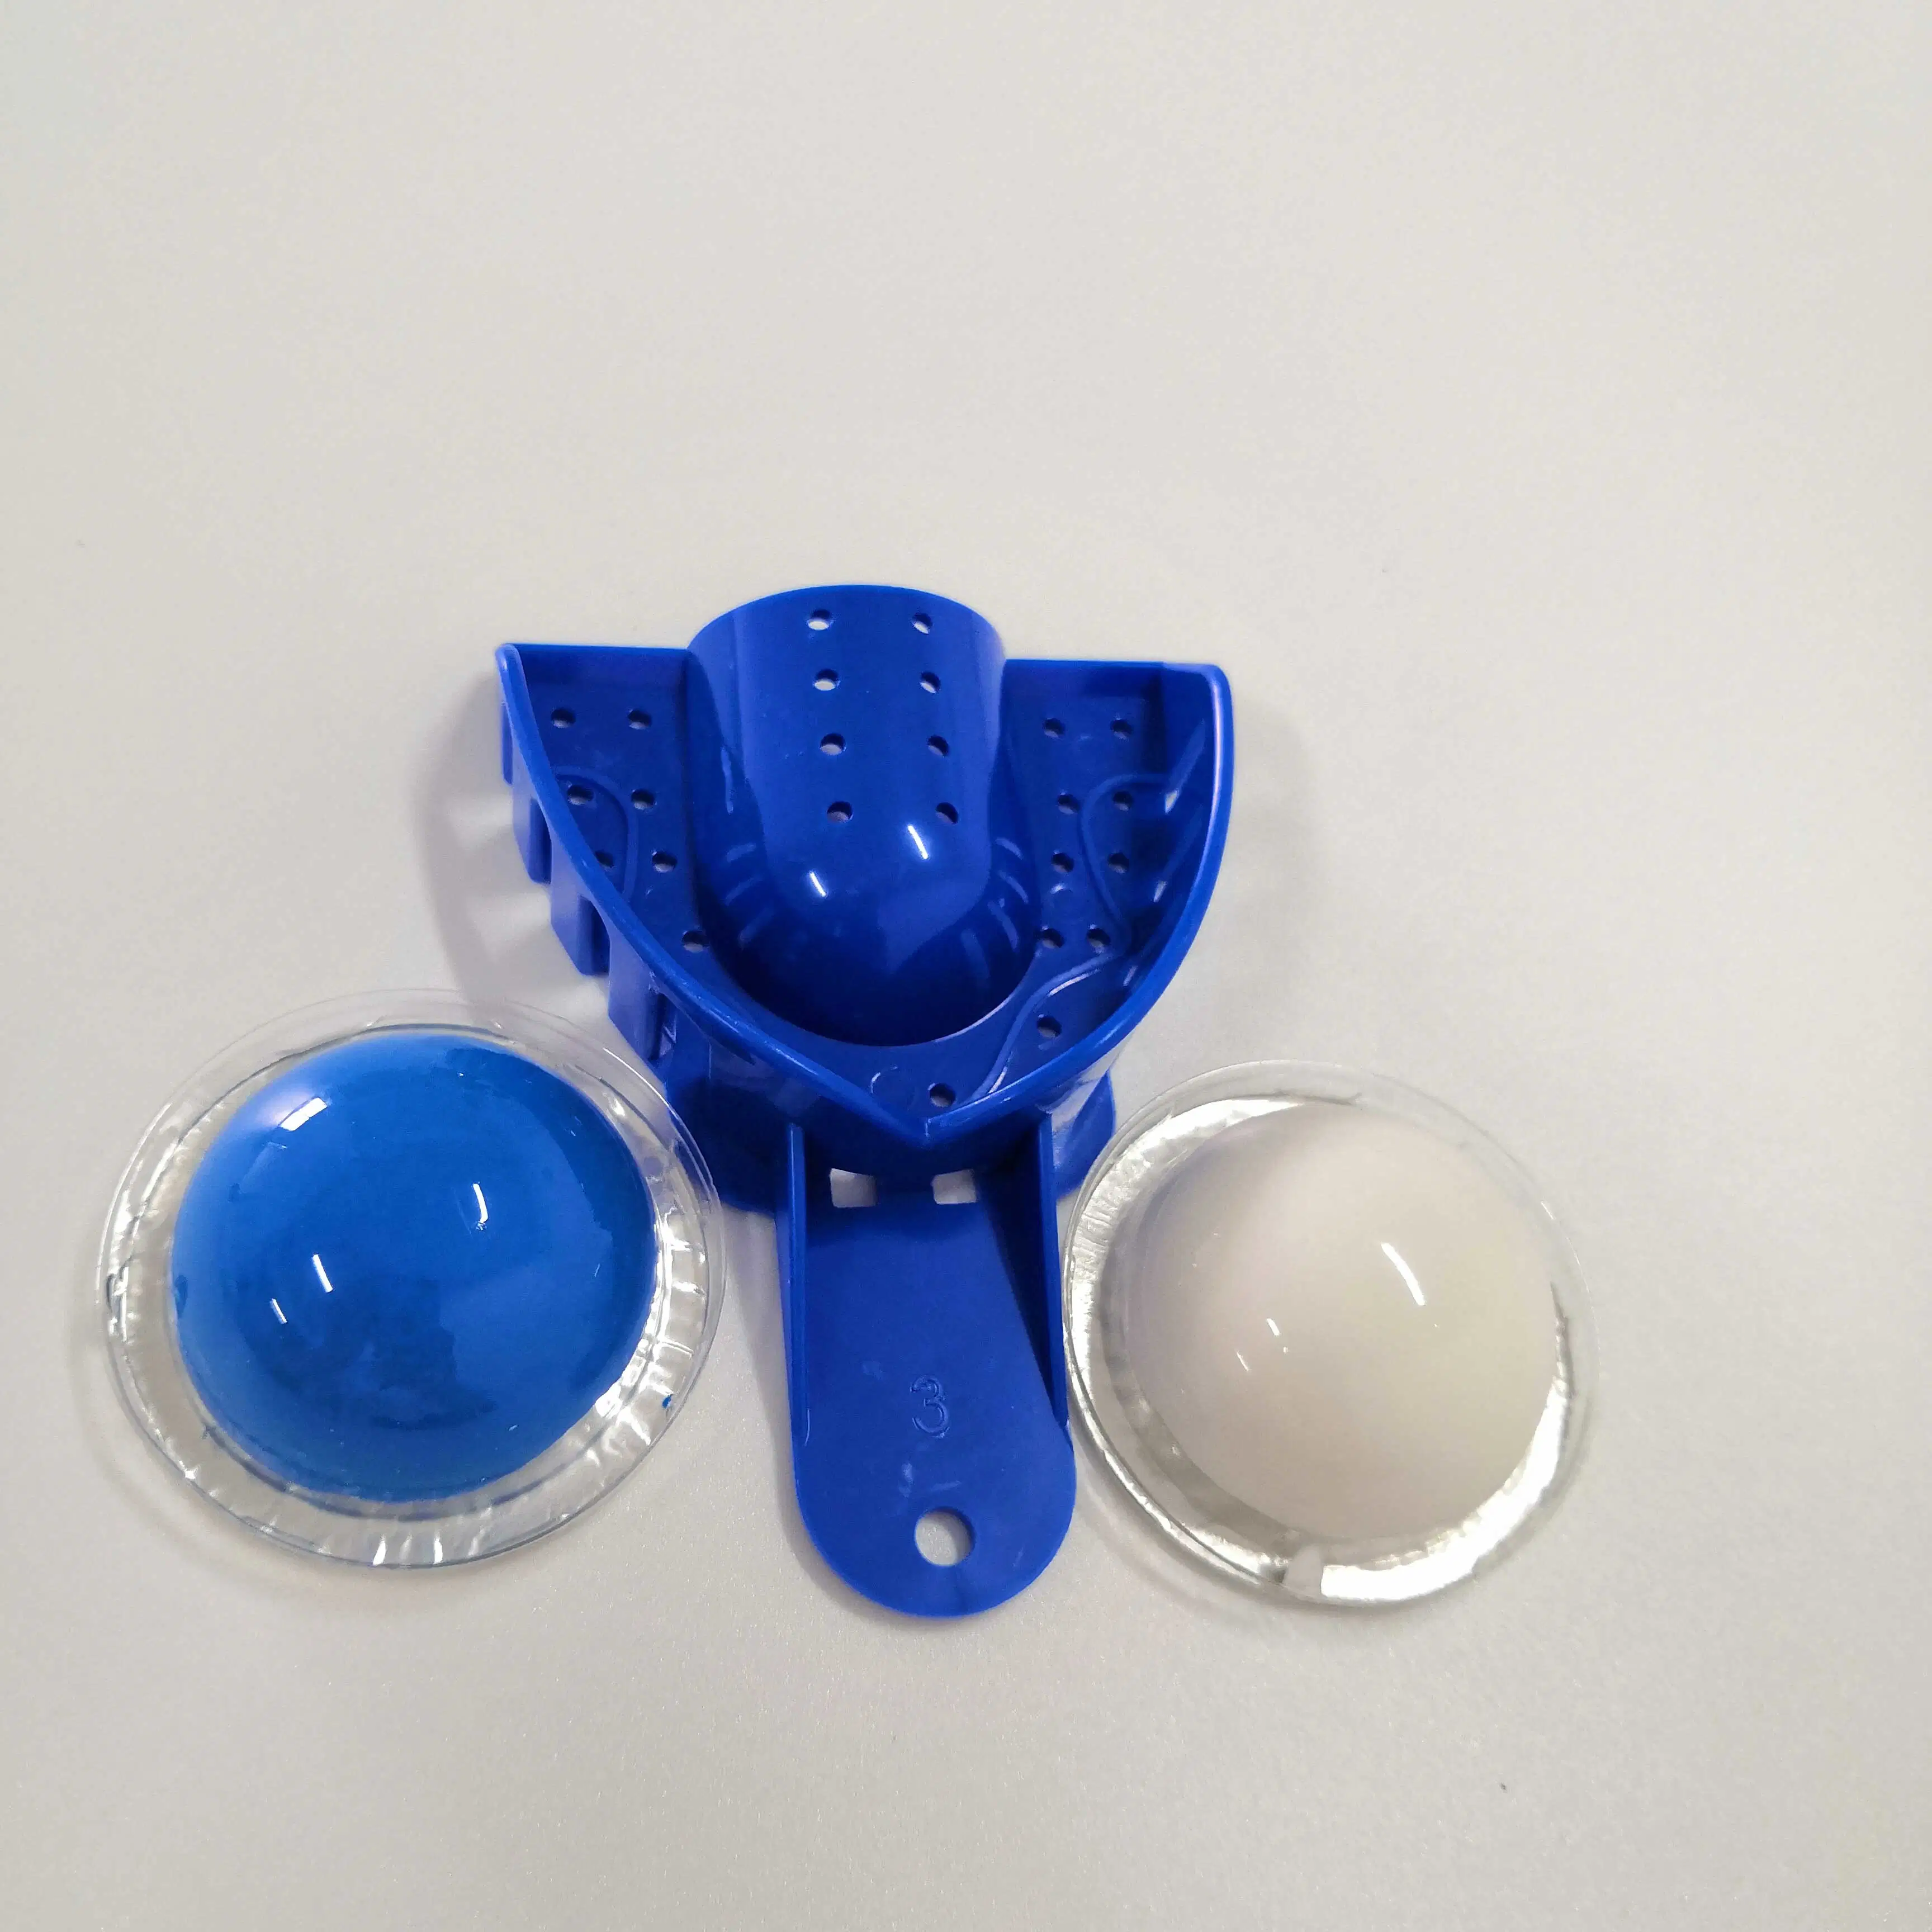 Hochey Medical Dental Silicone Impression Material with Cheap Price